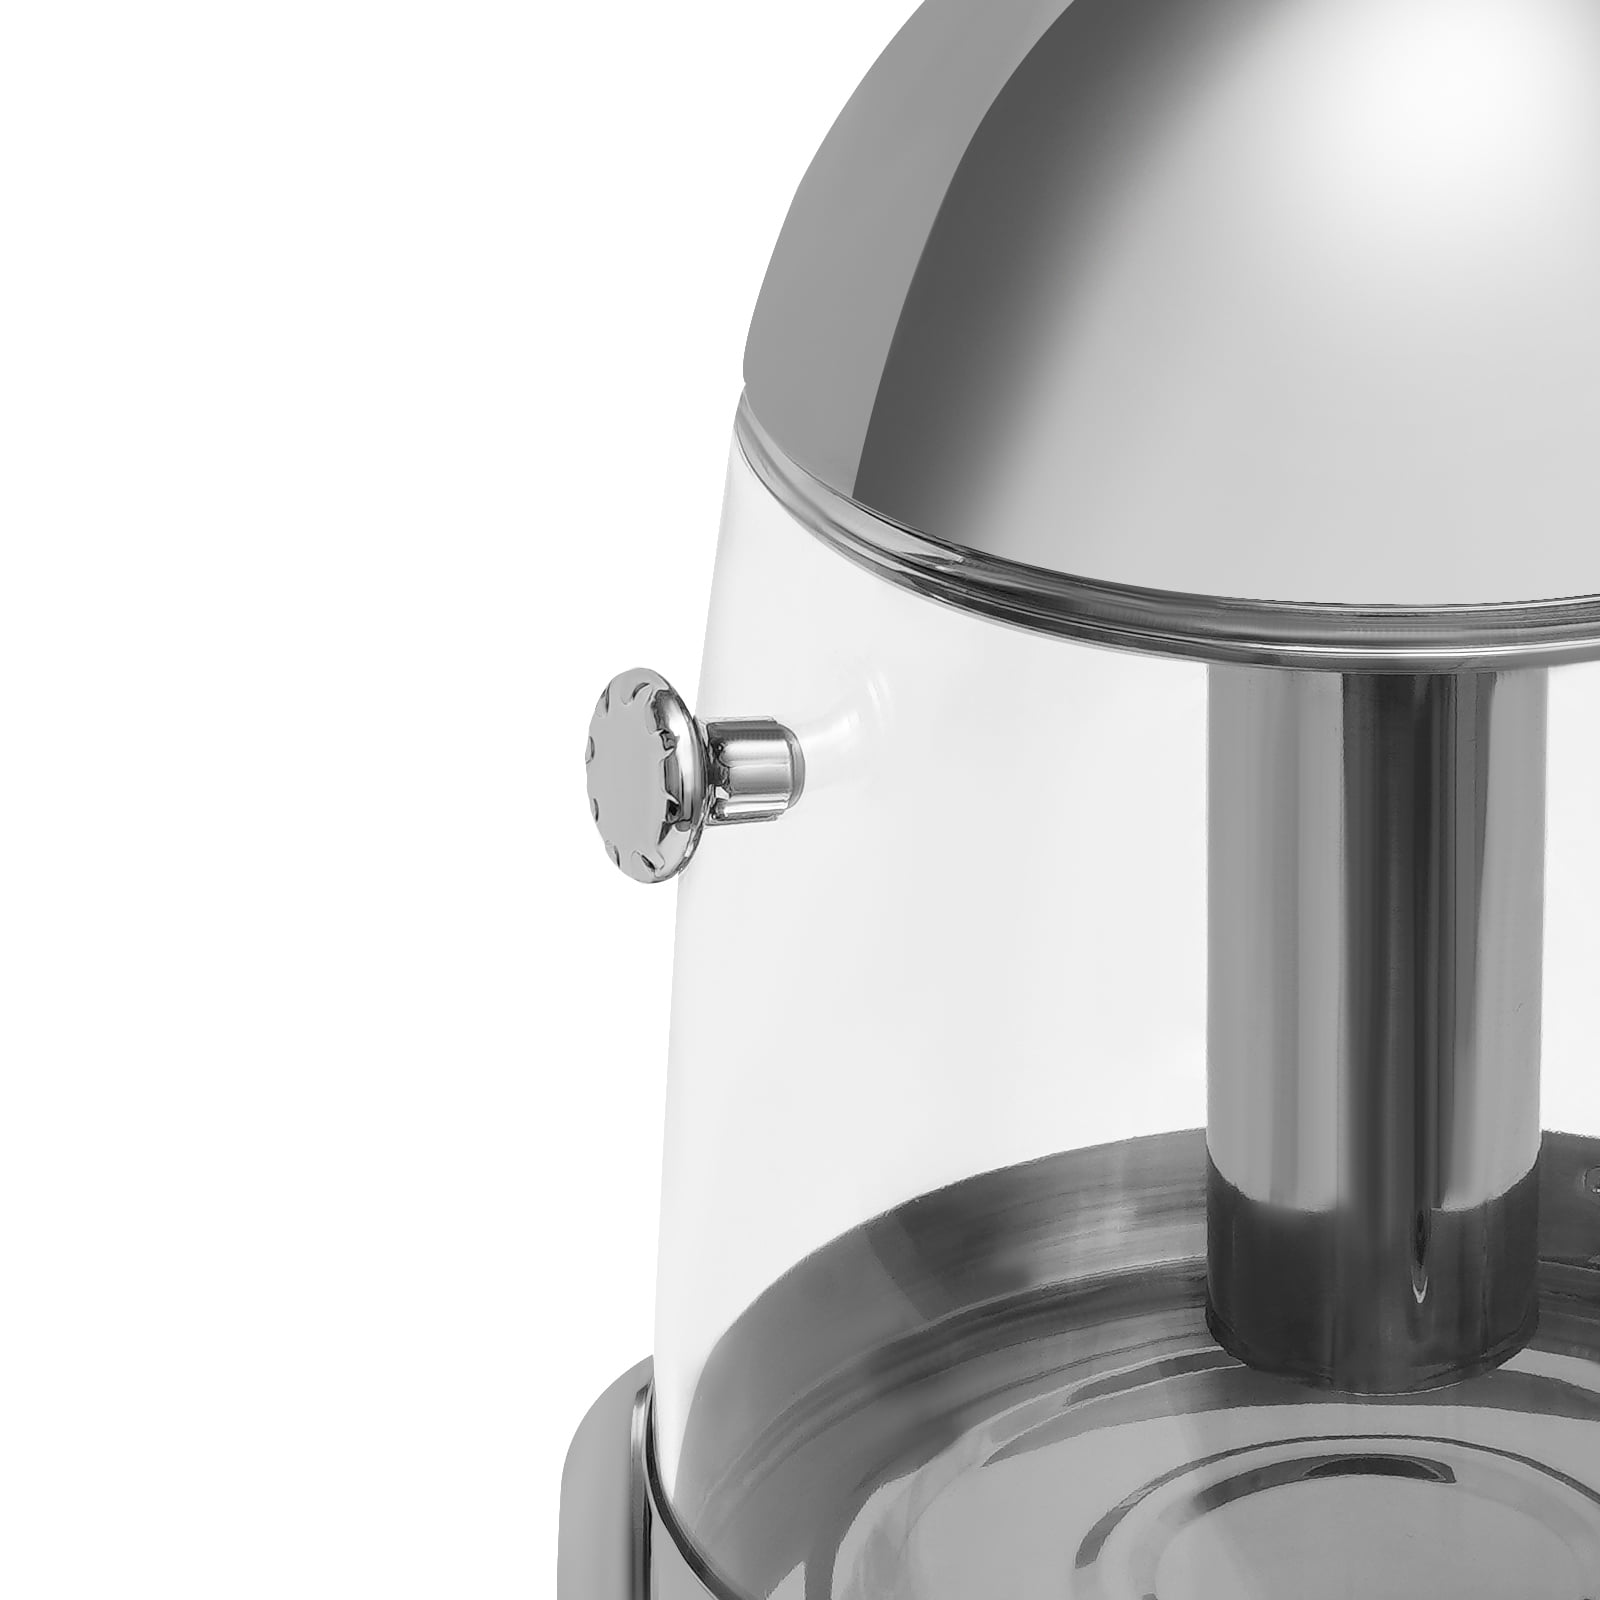 Total Chef Coffee Urn 24 Cup Electric Percolator, Automatic Hot Beverage  Maker for Tea, Cider, Mulled Wine, 1.5 Gal Capacity, Double Wall Insulated